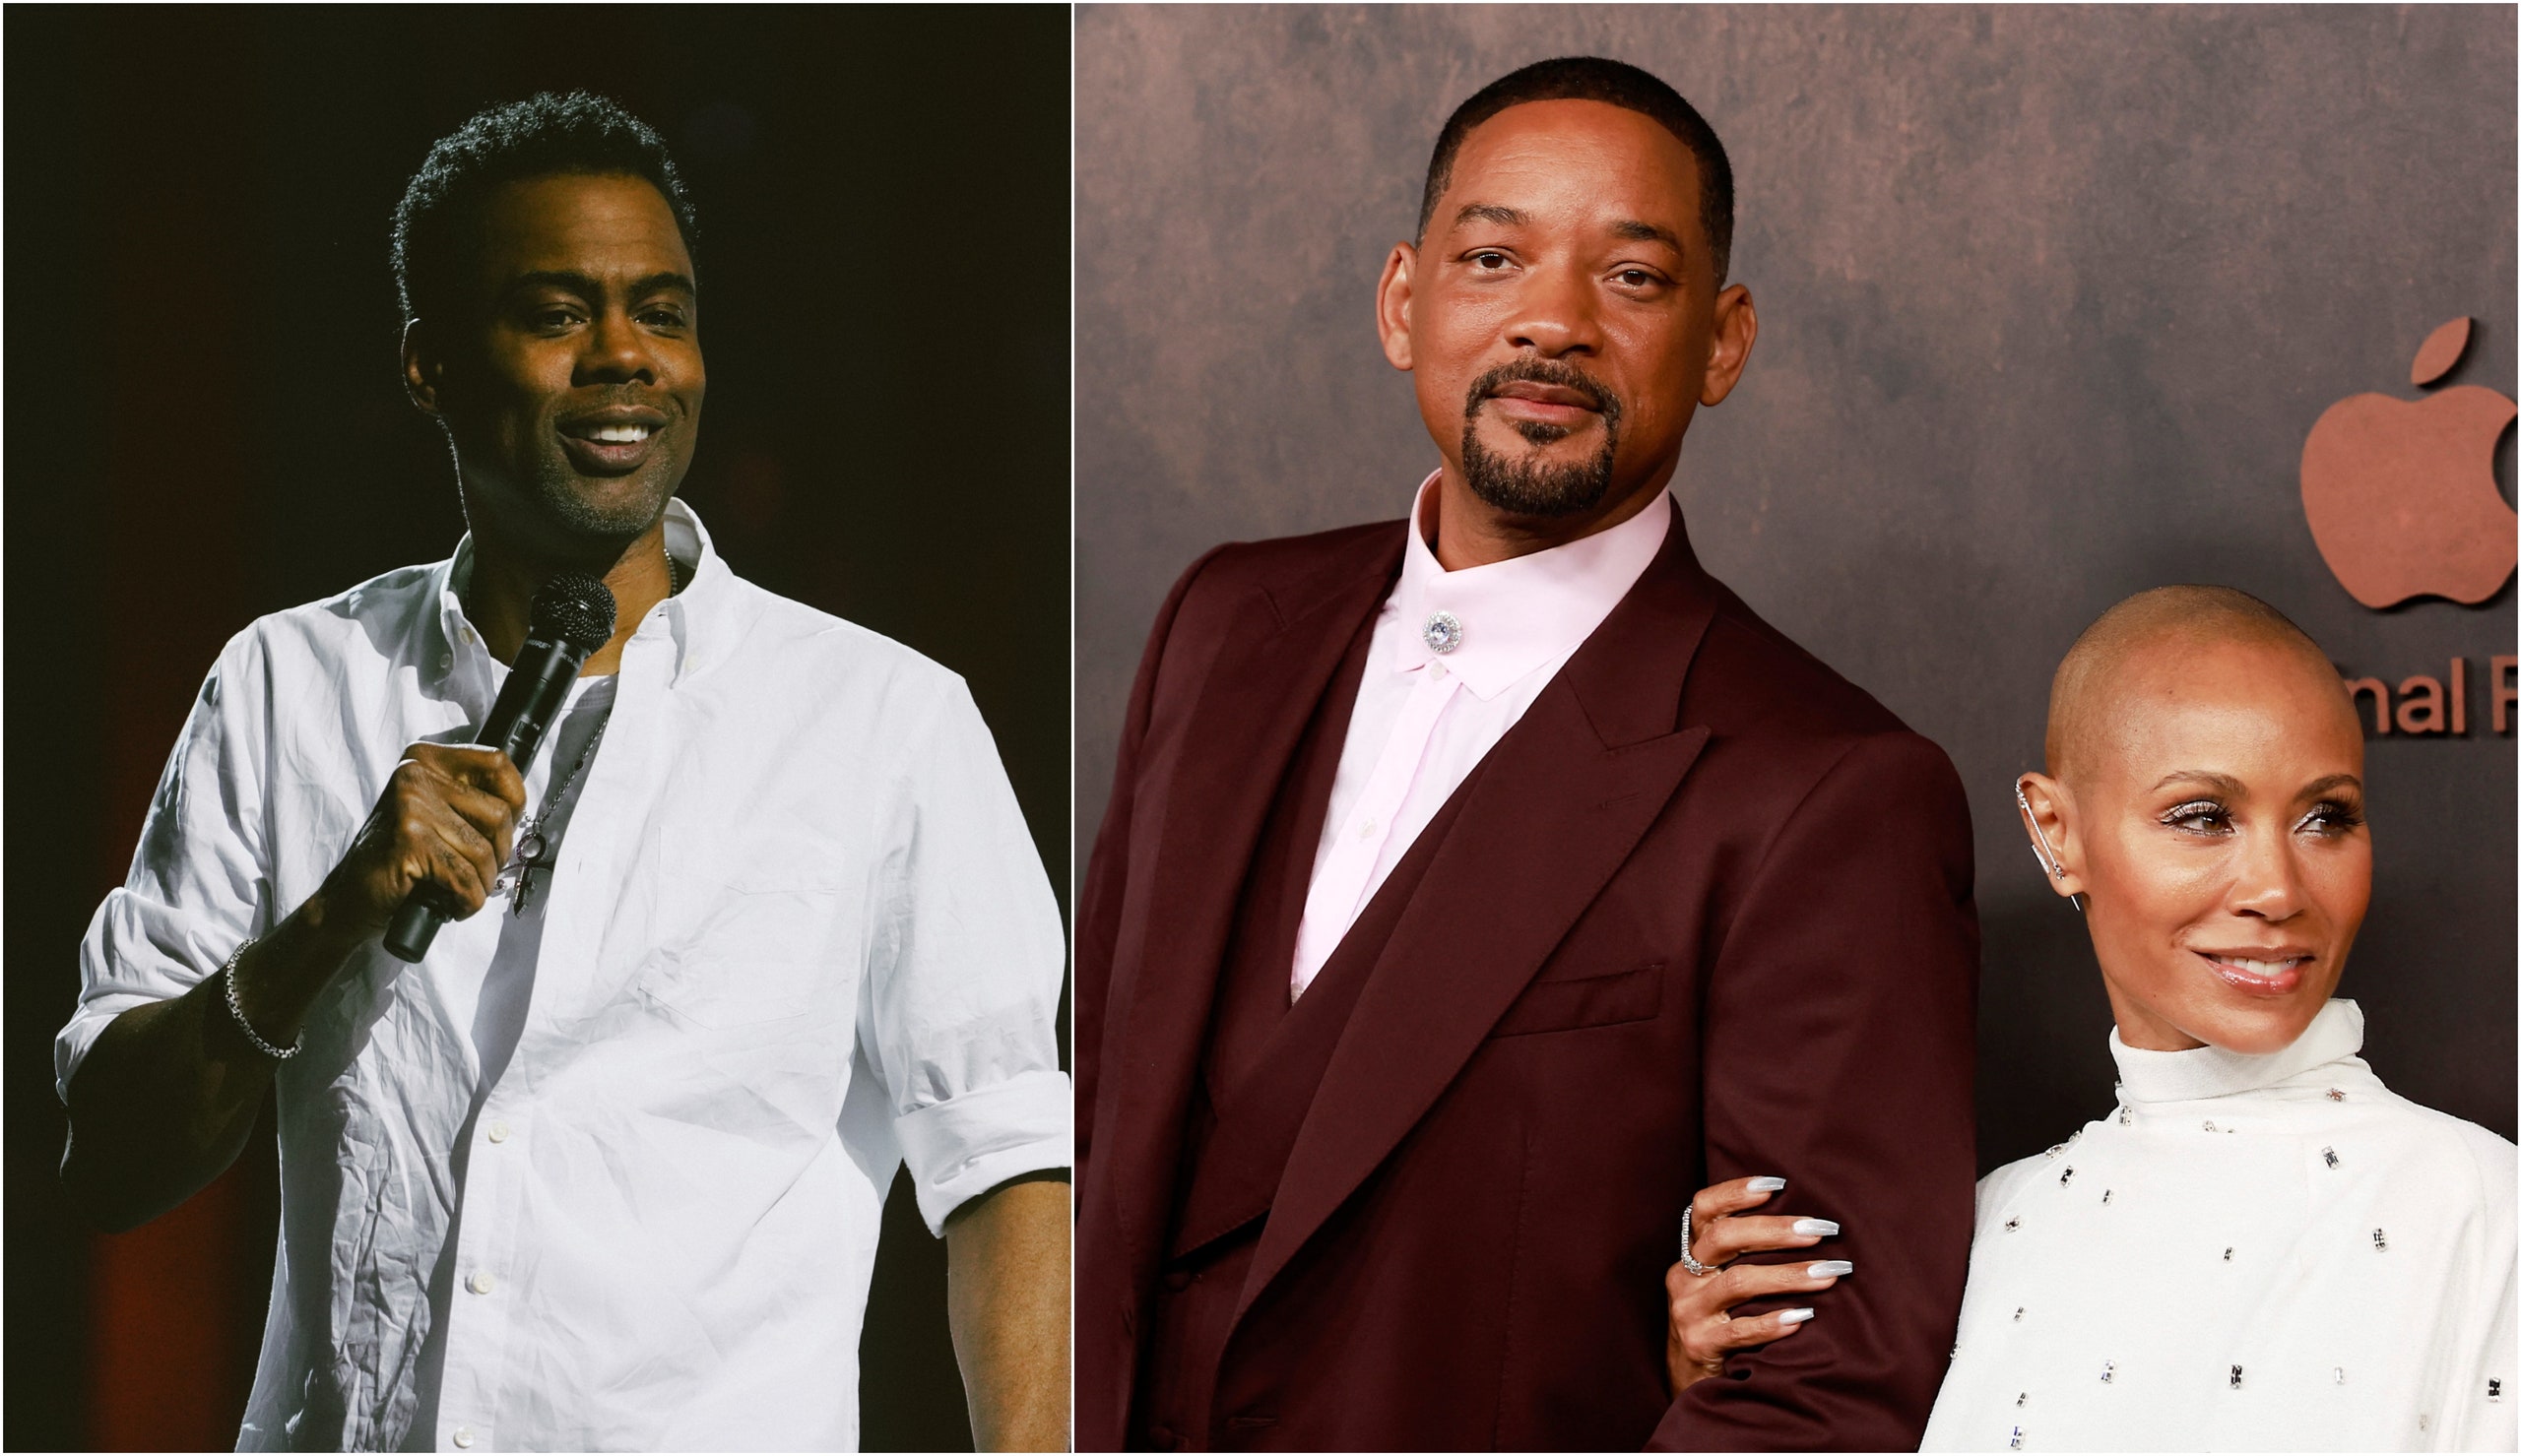 Will Smith and Chris Rock: A Comprehensive Analysis